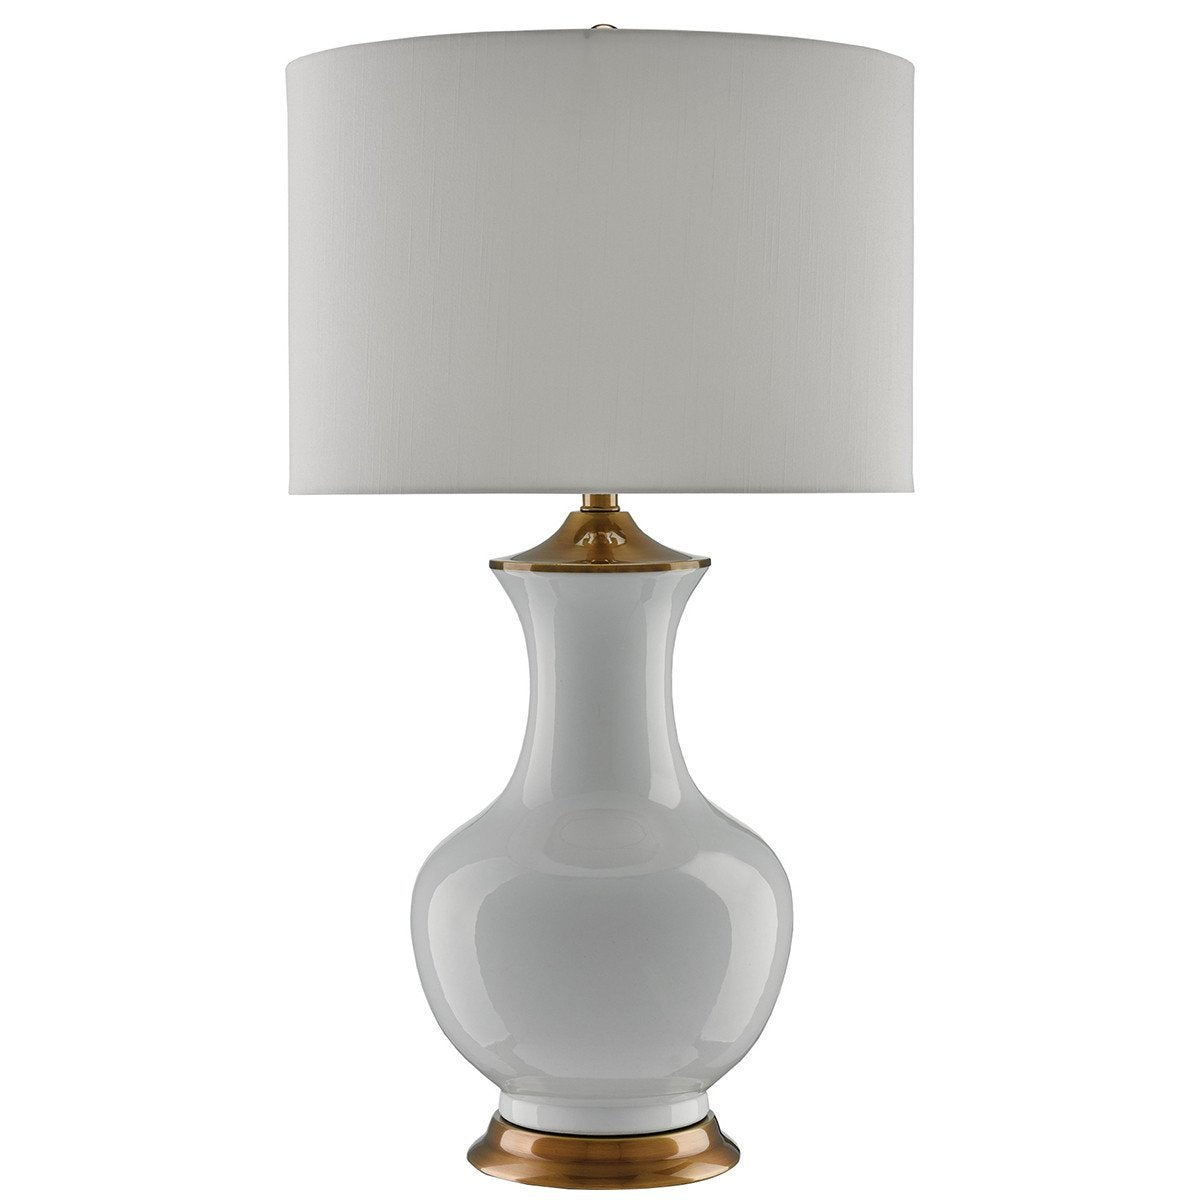 Currey and Company Lilou Table Lamp